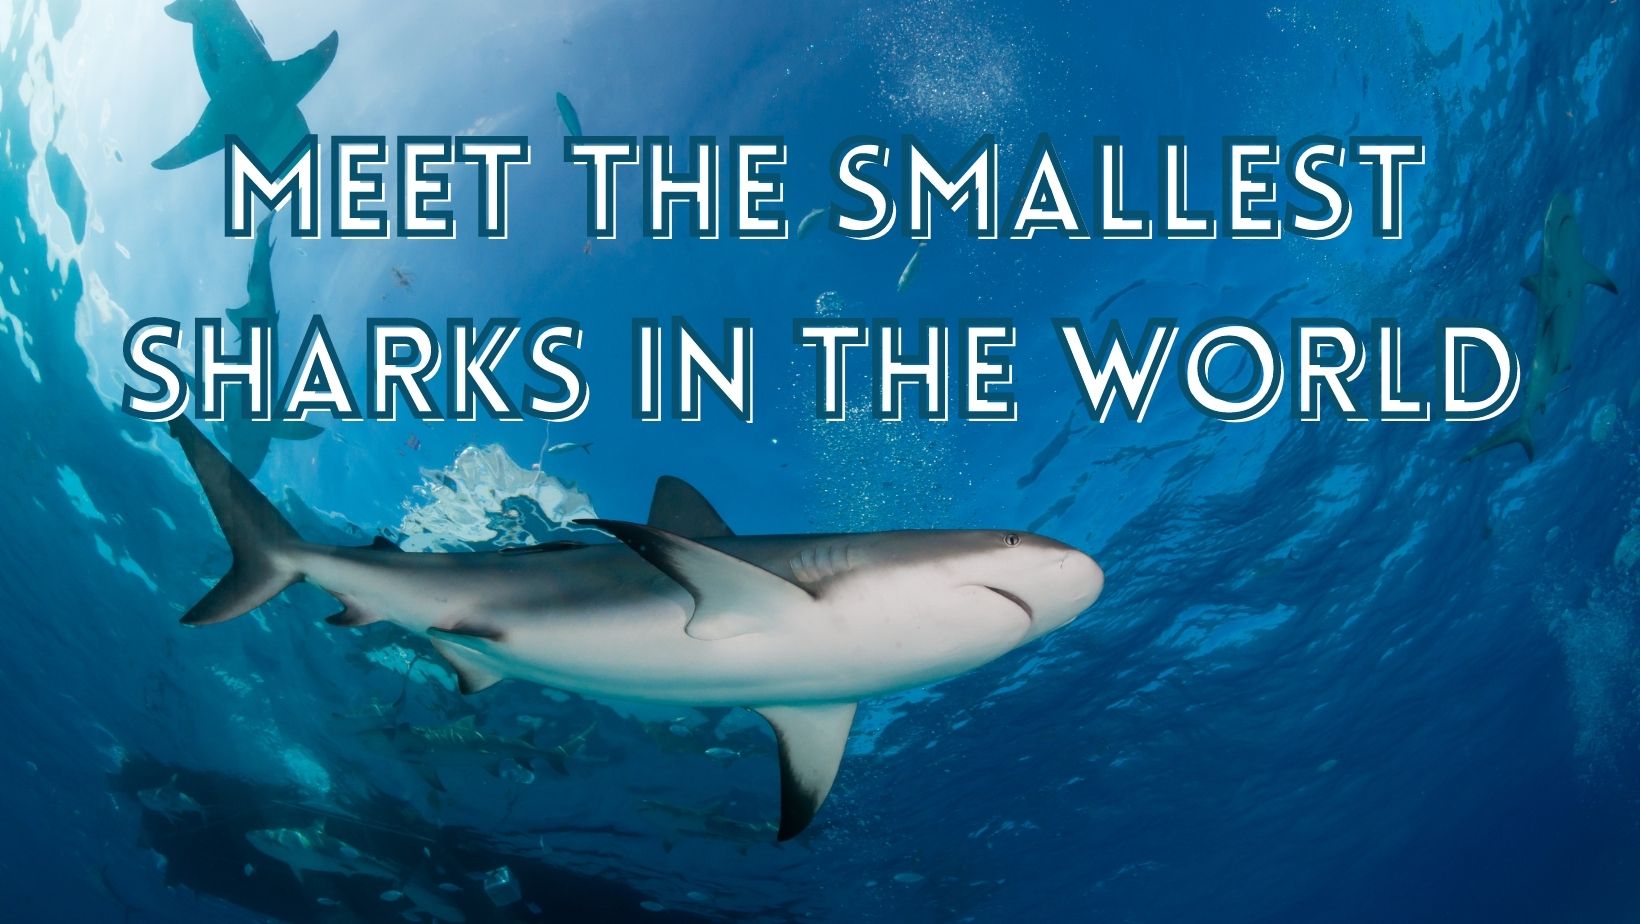 Smallest sharks in the world